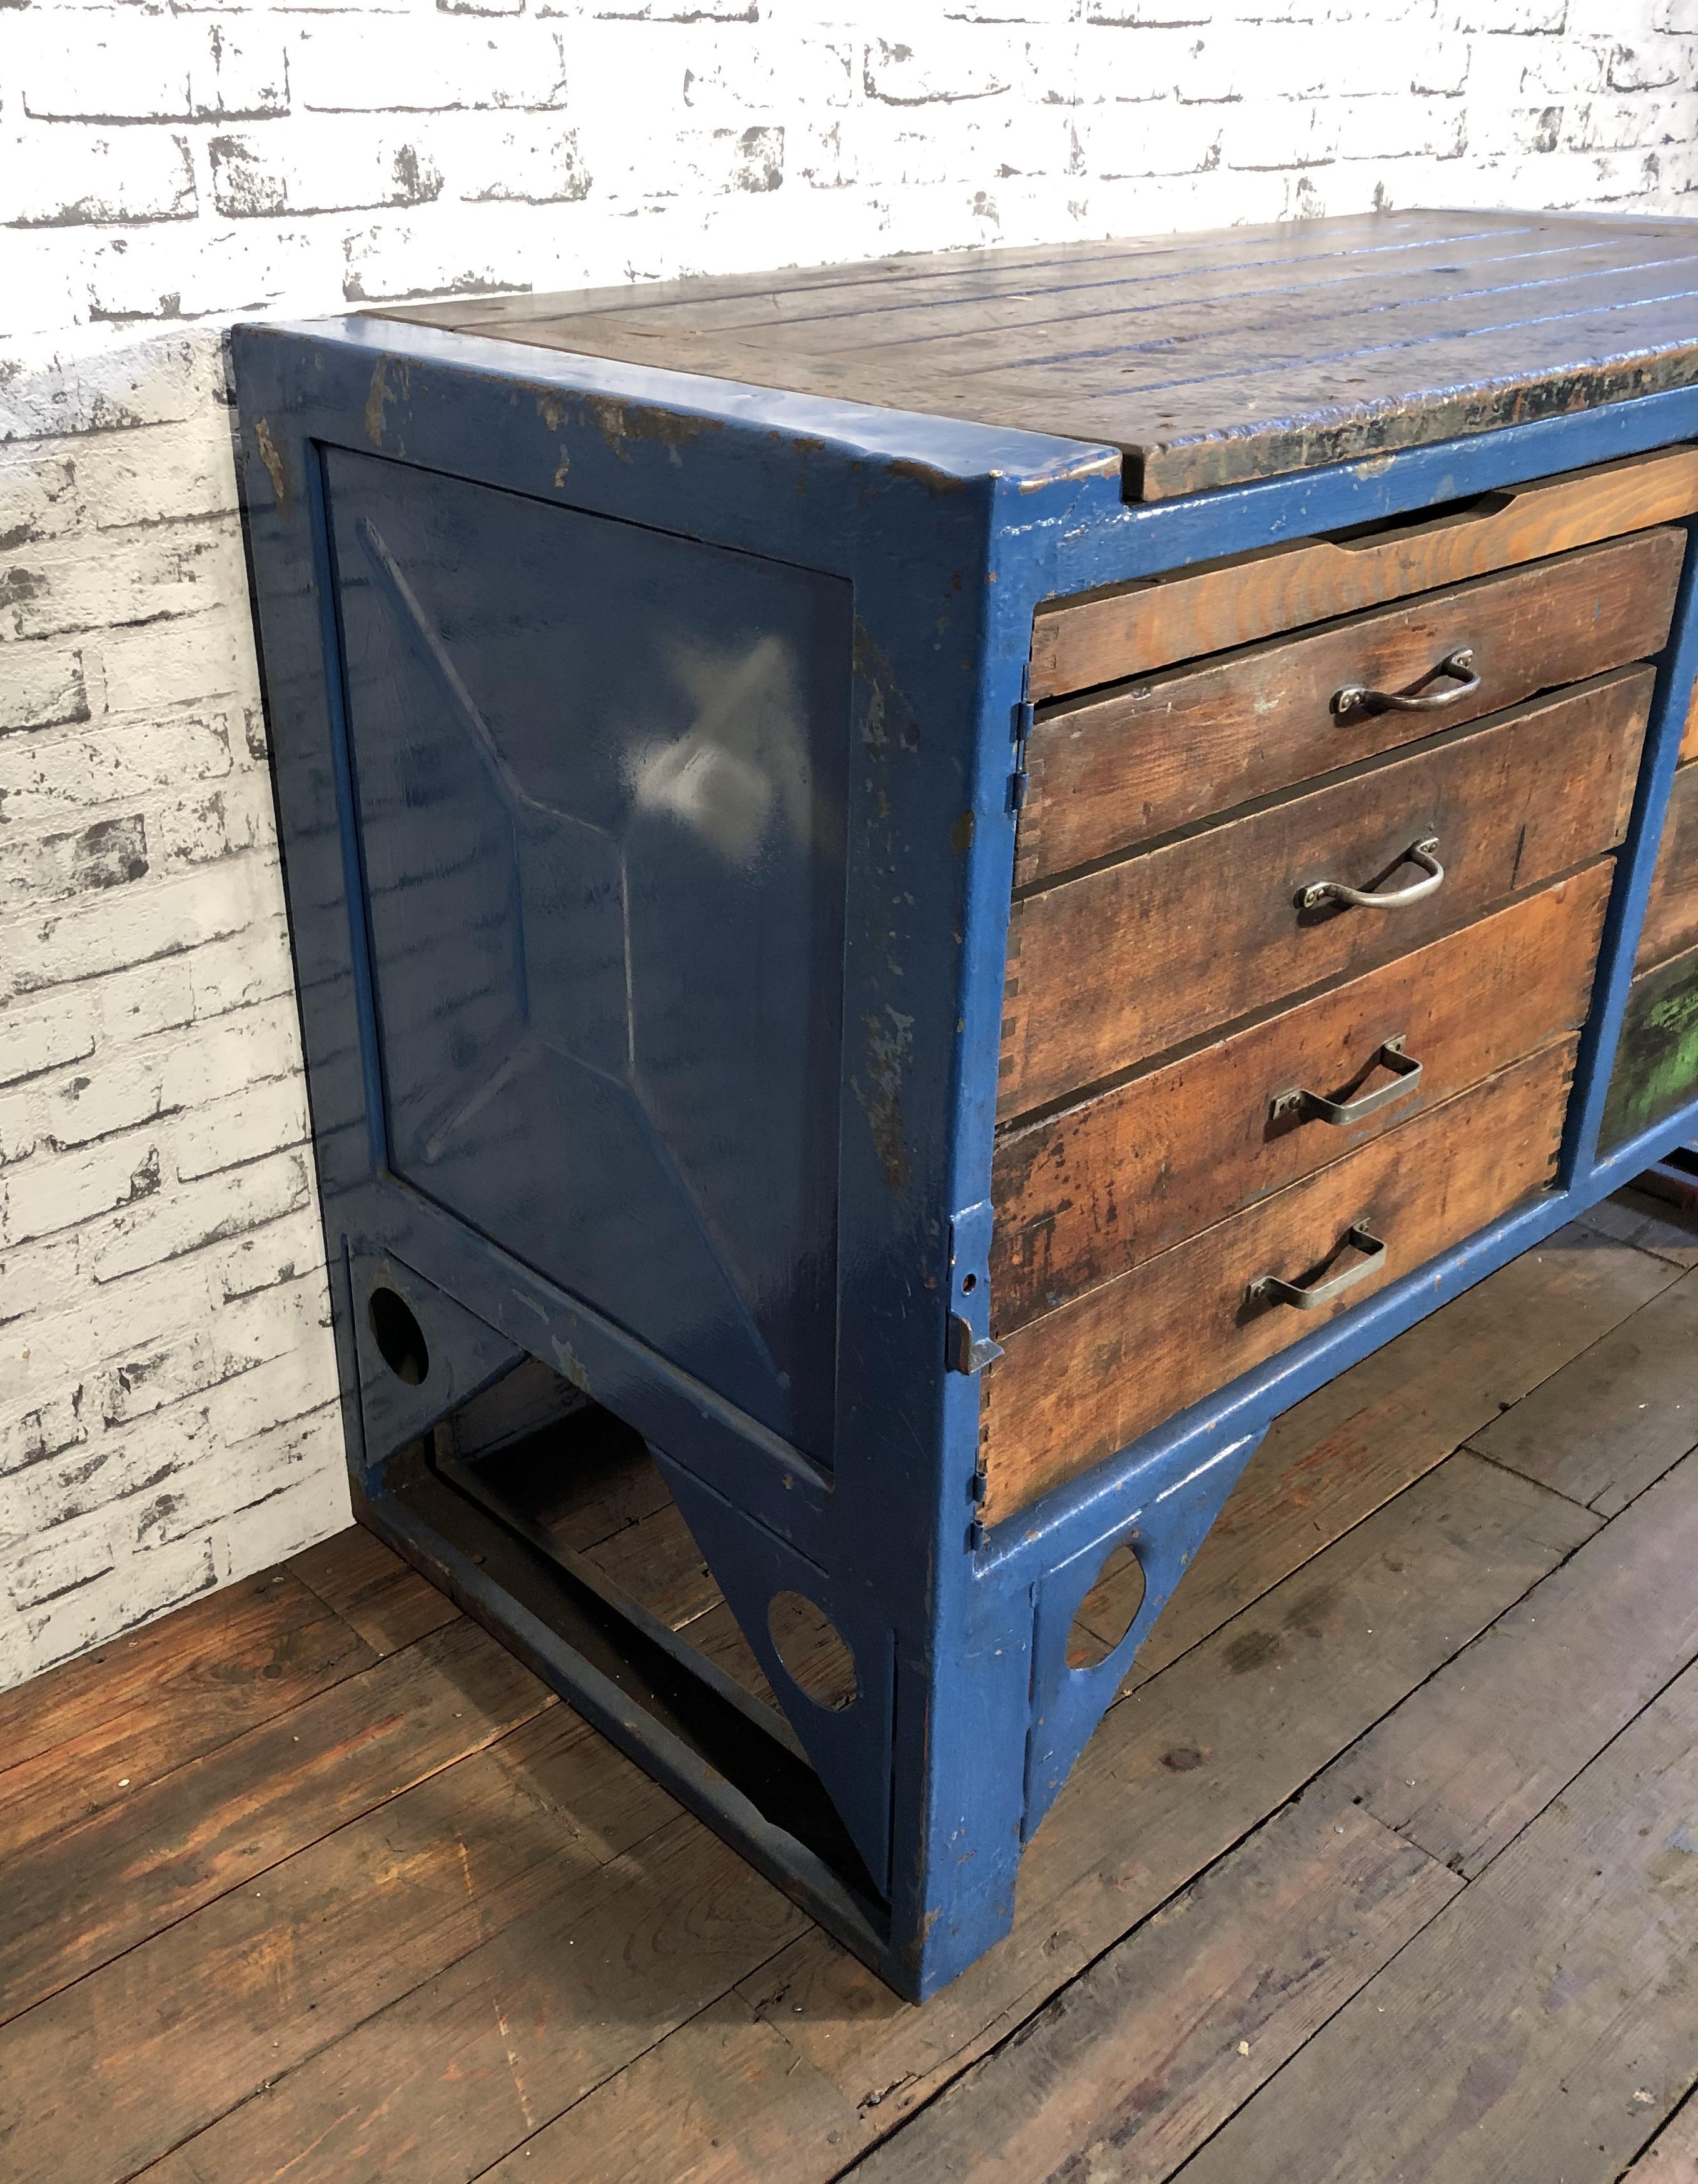 This Industrial chest of drawers features a steel frame with multi wood drawers. Eight drawers have different heights. The chest of drawers is in a good vintage condition with a nice blue patina. It weights 86 kg.
Drawer dimensions: Width 58cm,